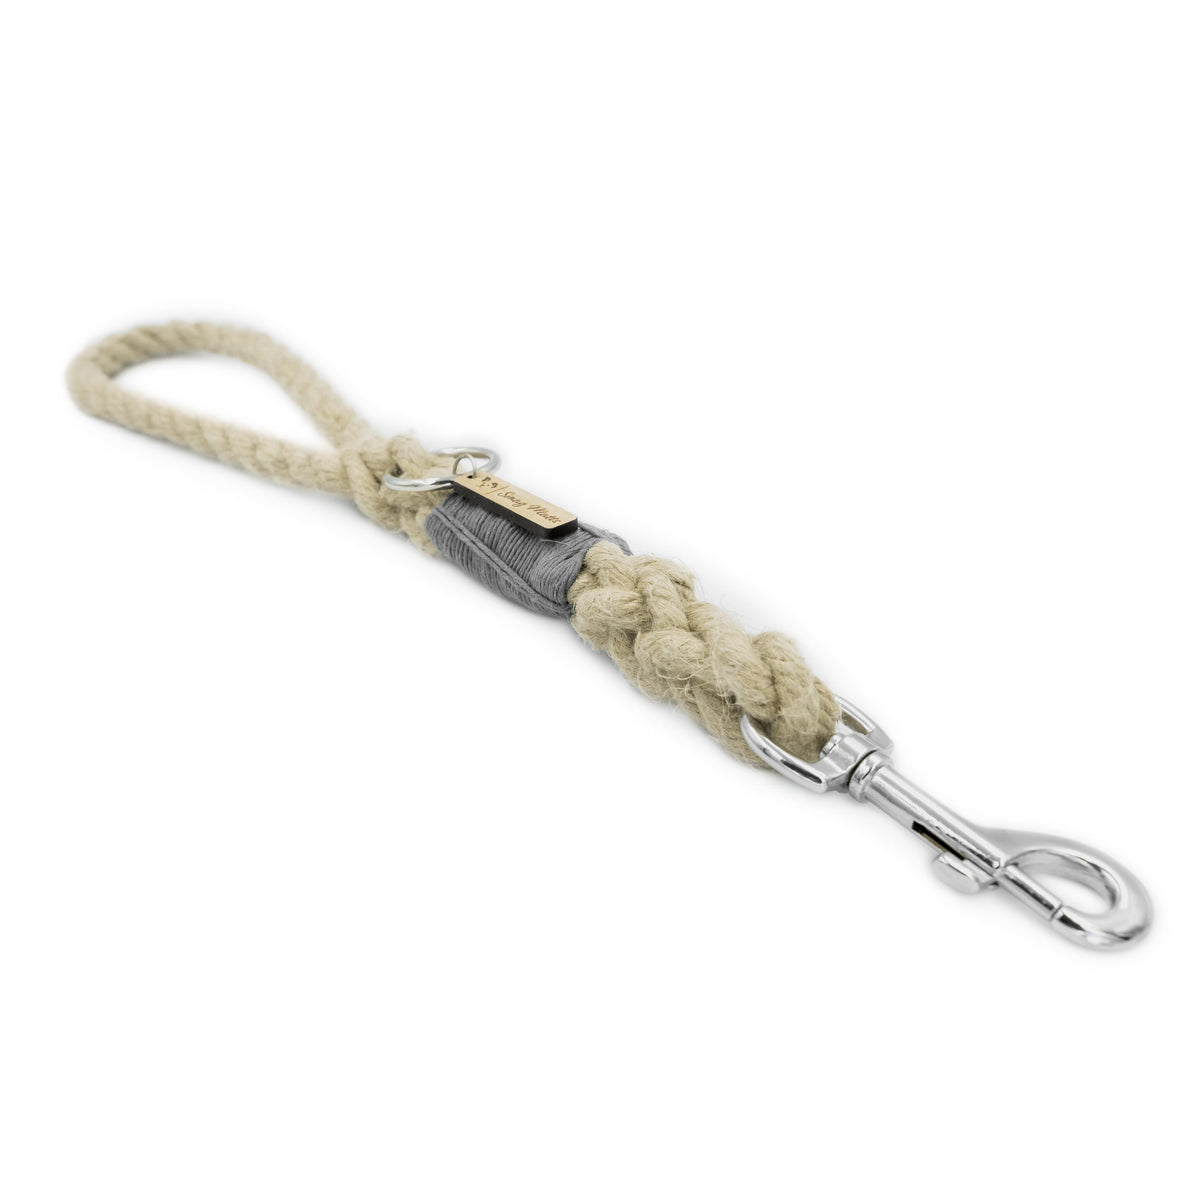 Smug Mutts Handmade, Organic, Natural Hemp Traffic Lead with Grey Whipping, Sliver Spring Snap Clip and a Silver O-Ring, Natural and Eco Friendly Dog Lead